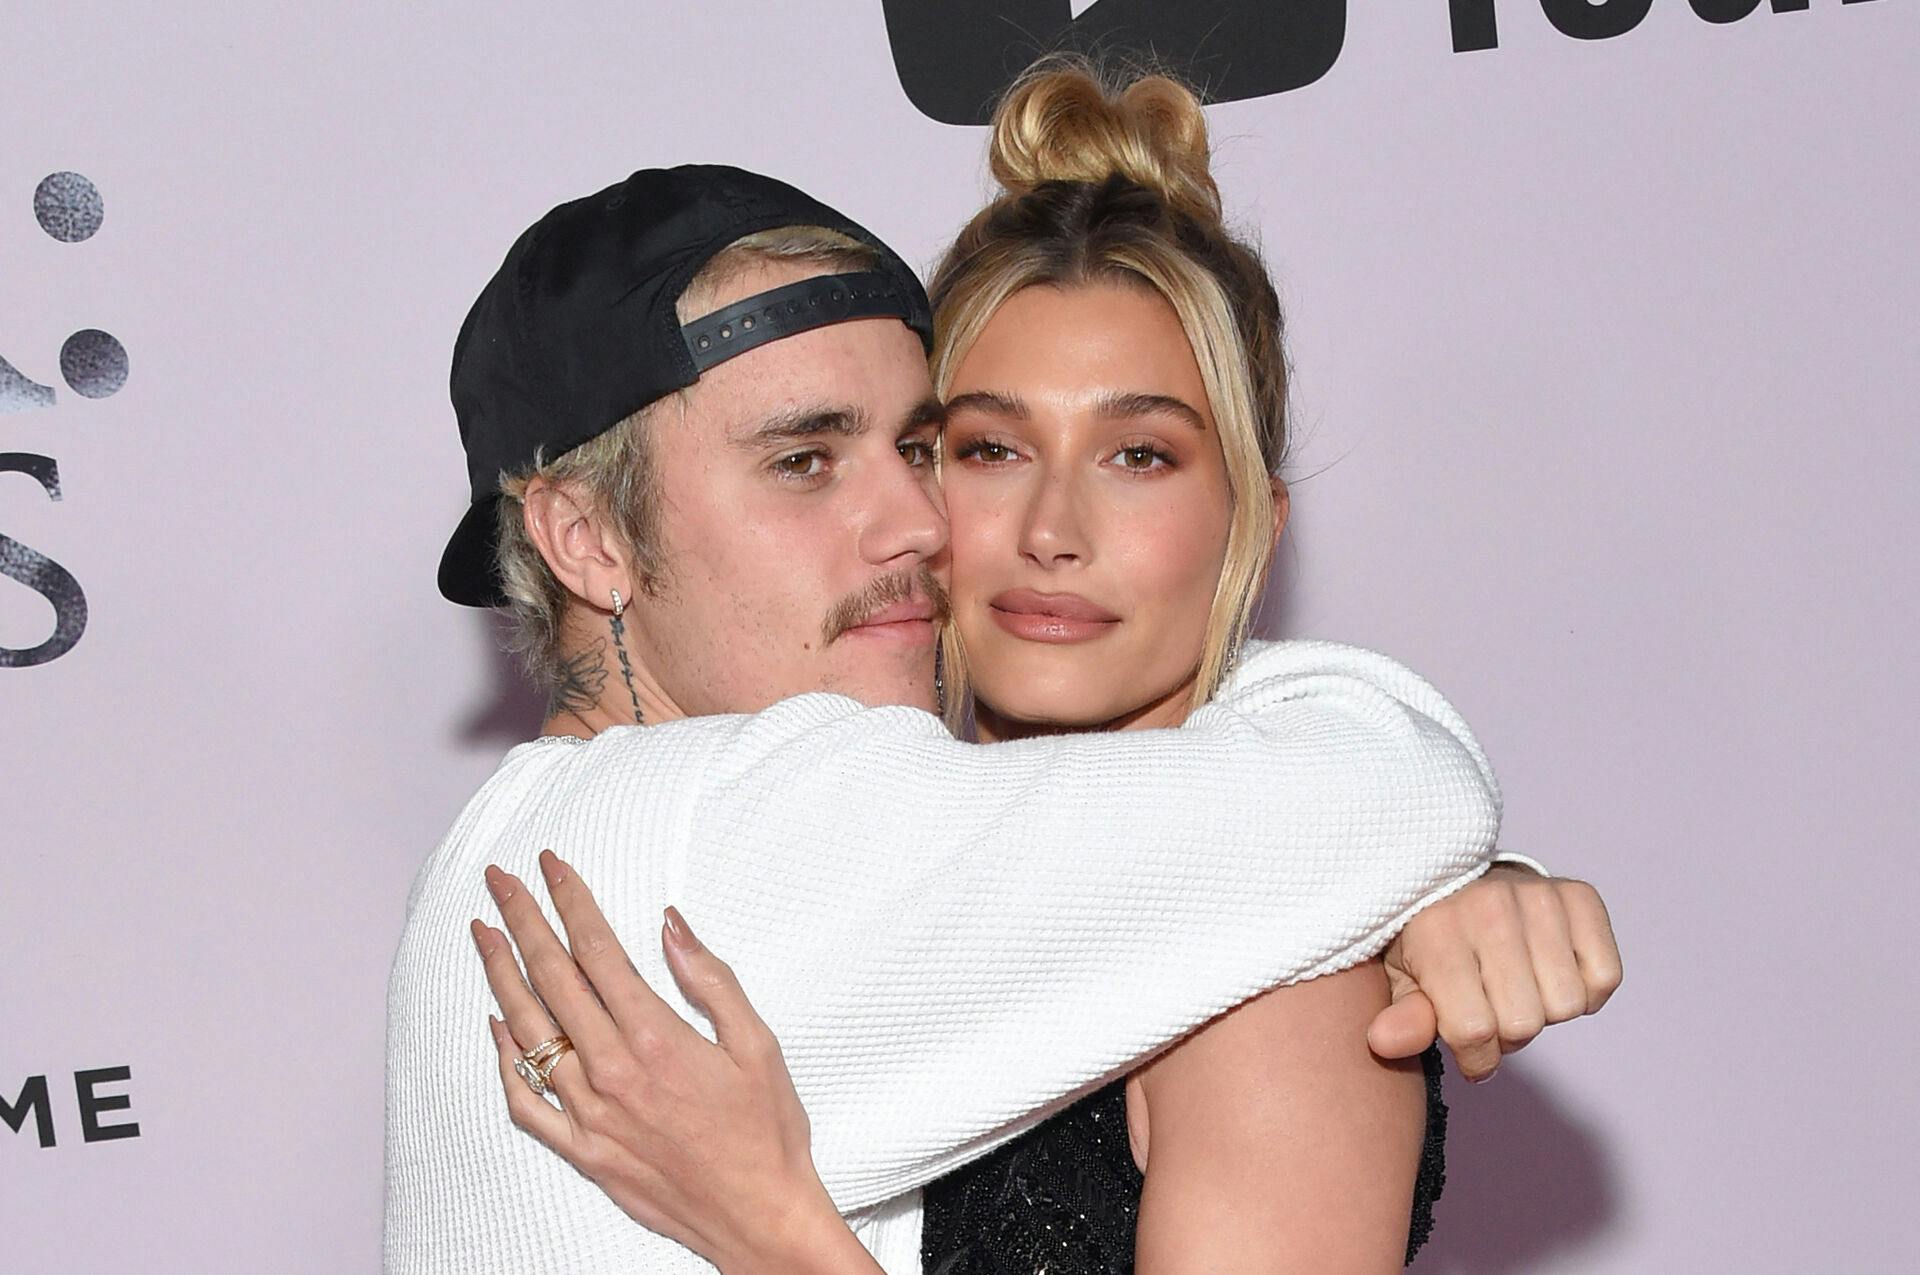 Canadian singer Justin Bieber (L) and wife US model Hailey Bieber arrive for YouTube Originals' "Justin Bieber: Seasons" premiere at the Regency Bruin Theatre in Los Angeles on January 27, 2020.  Lisa O'CONNOR / AFP